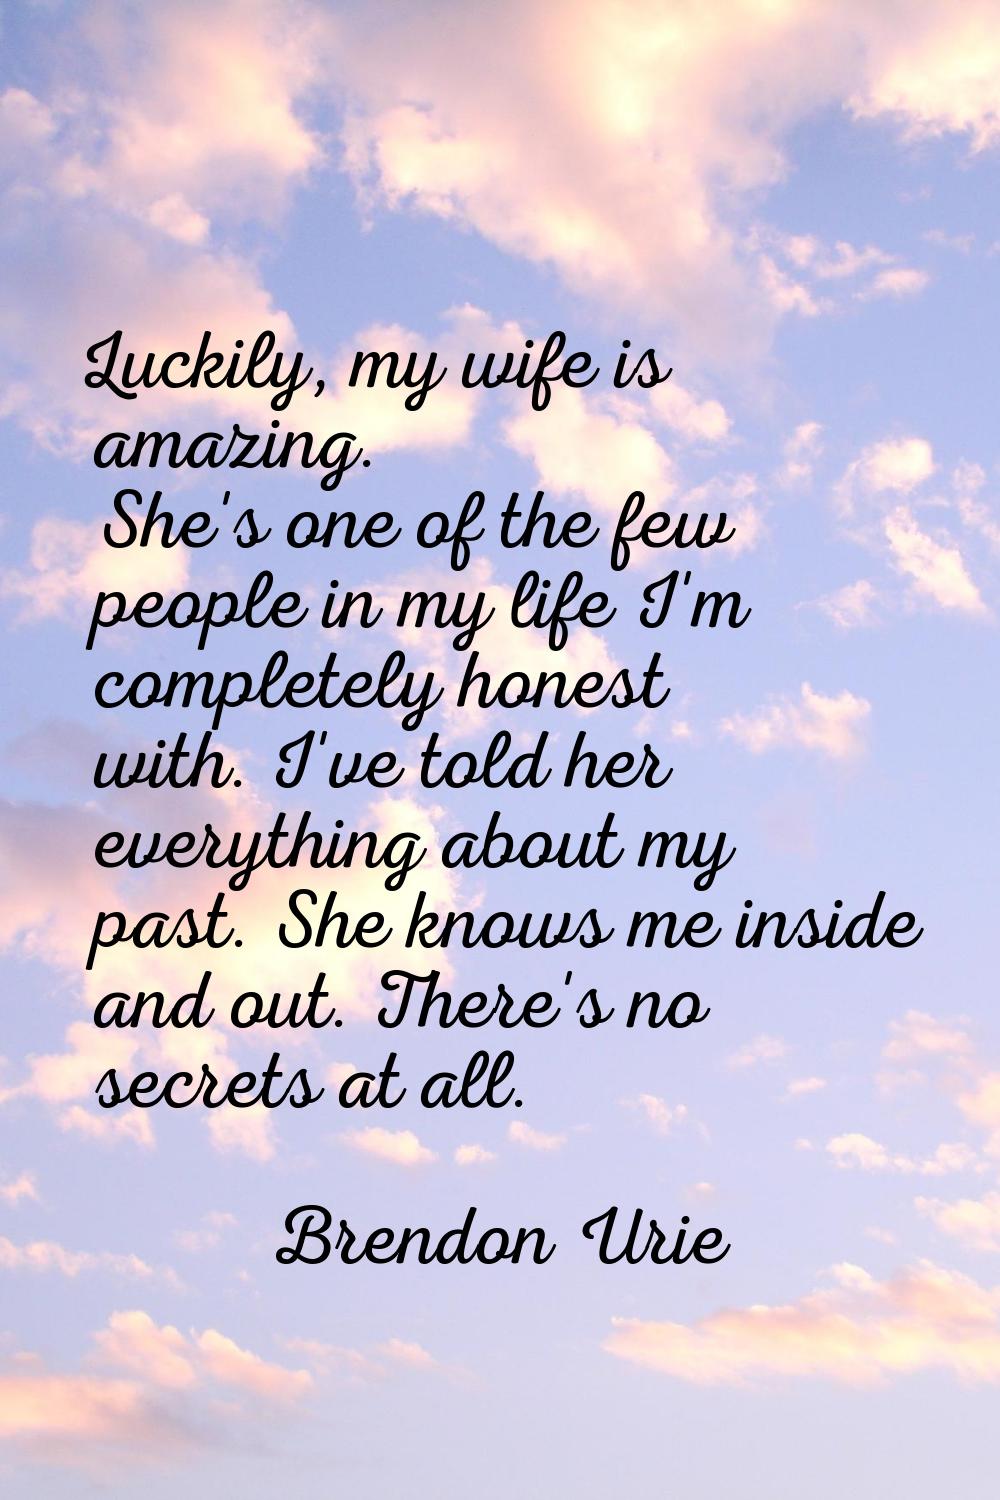 Luckily, my wife is amazing. She's one of the few people in my life I'm completely honest with. I'v